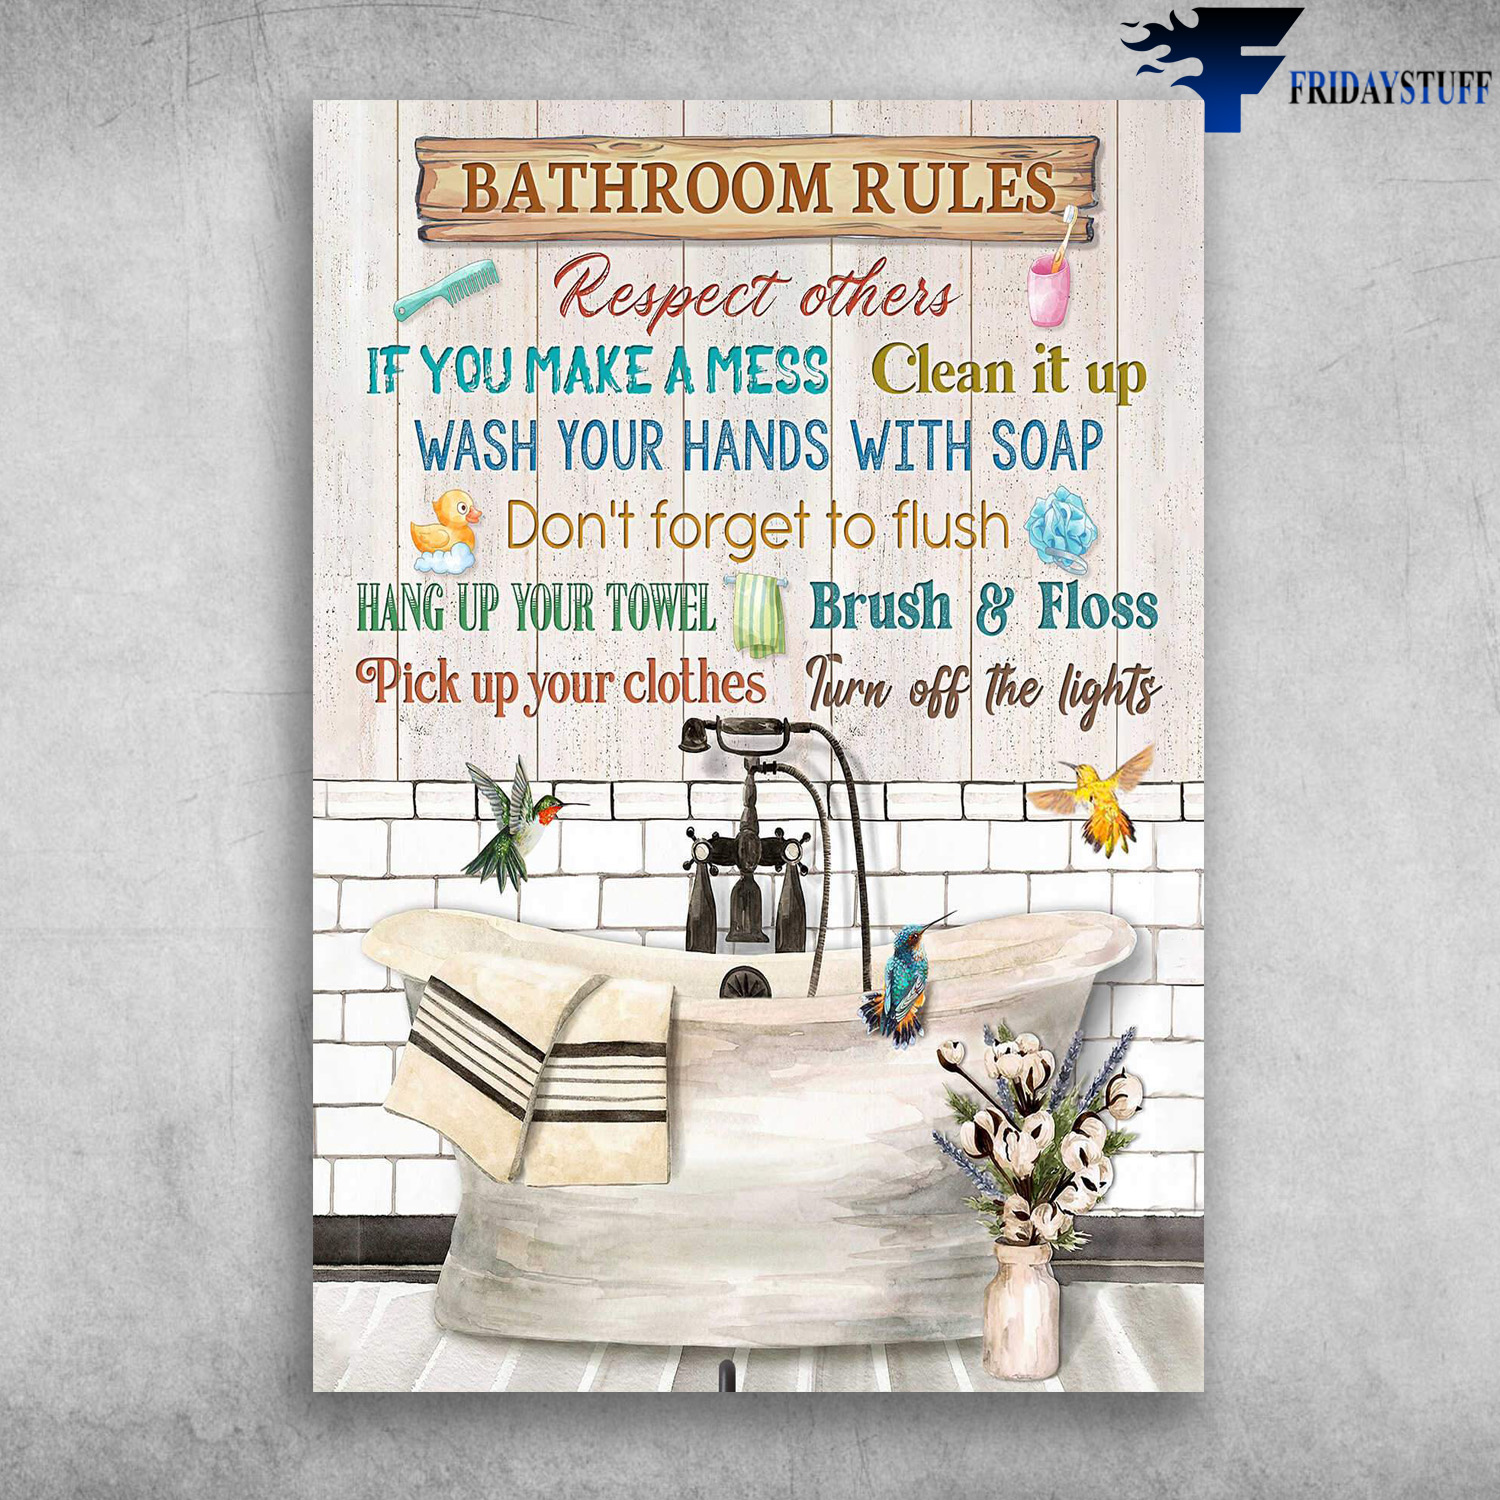 Humming Bird - Bathroom Rules, Respect Others, If You Make A Mess, Clean It Up, Wash Your Hands With Soap, Don't Forget To Flush, Han Up Your Towel, Brush And Floss, Pick Up Your Clothes, Turn Off The Light